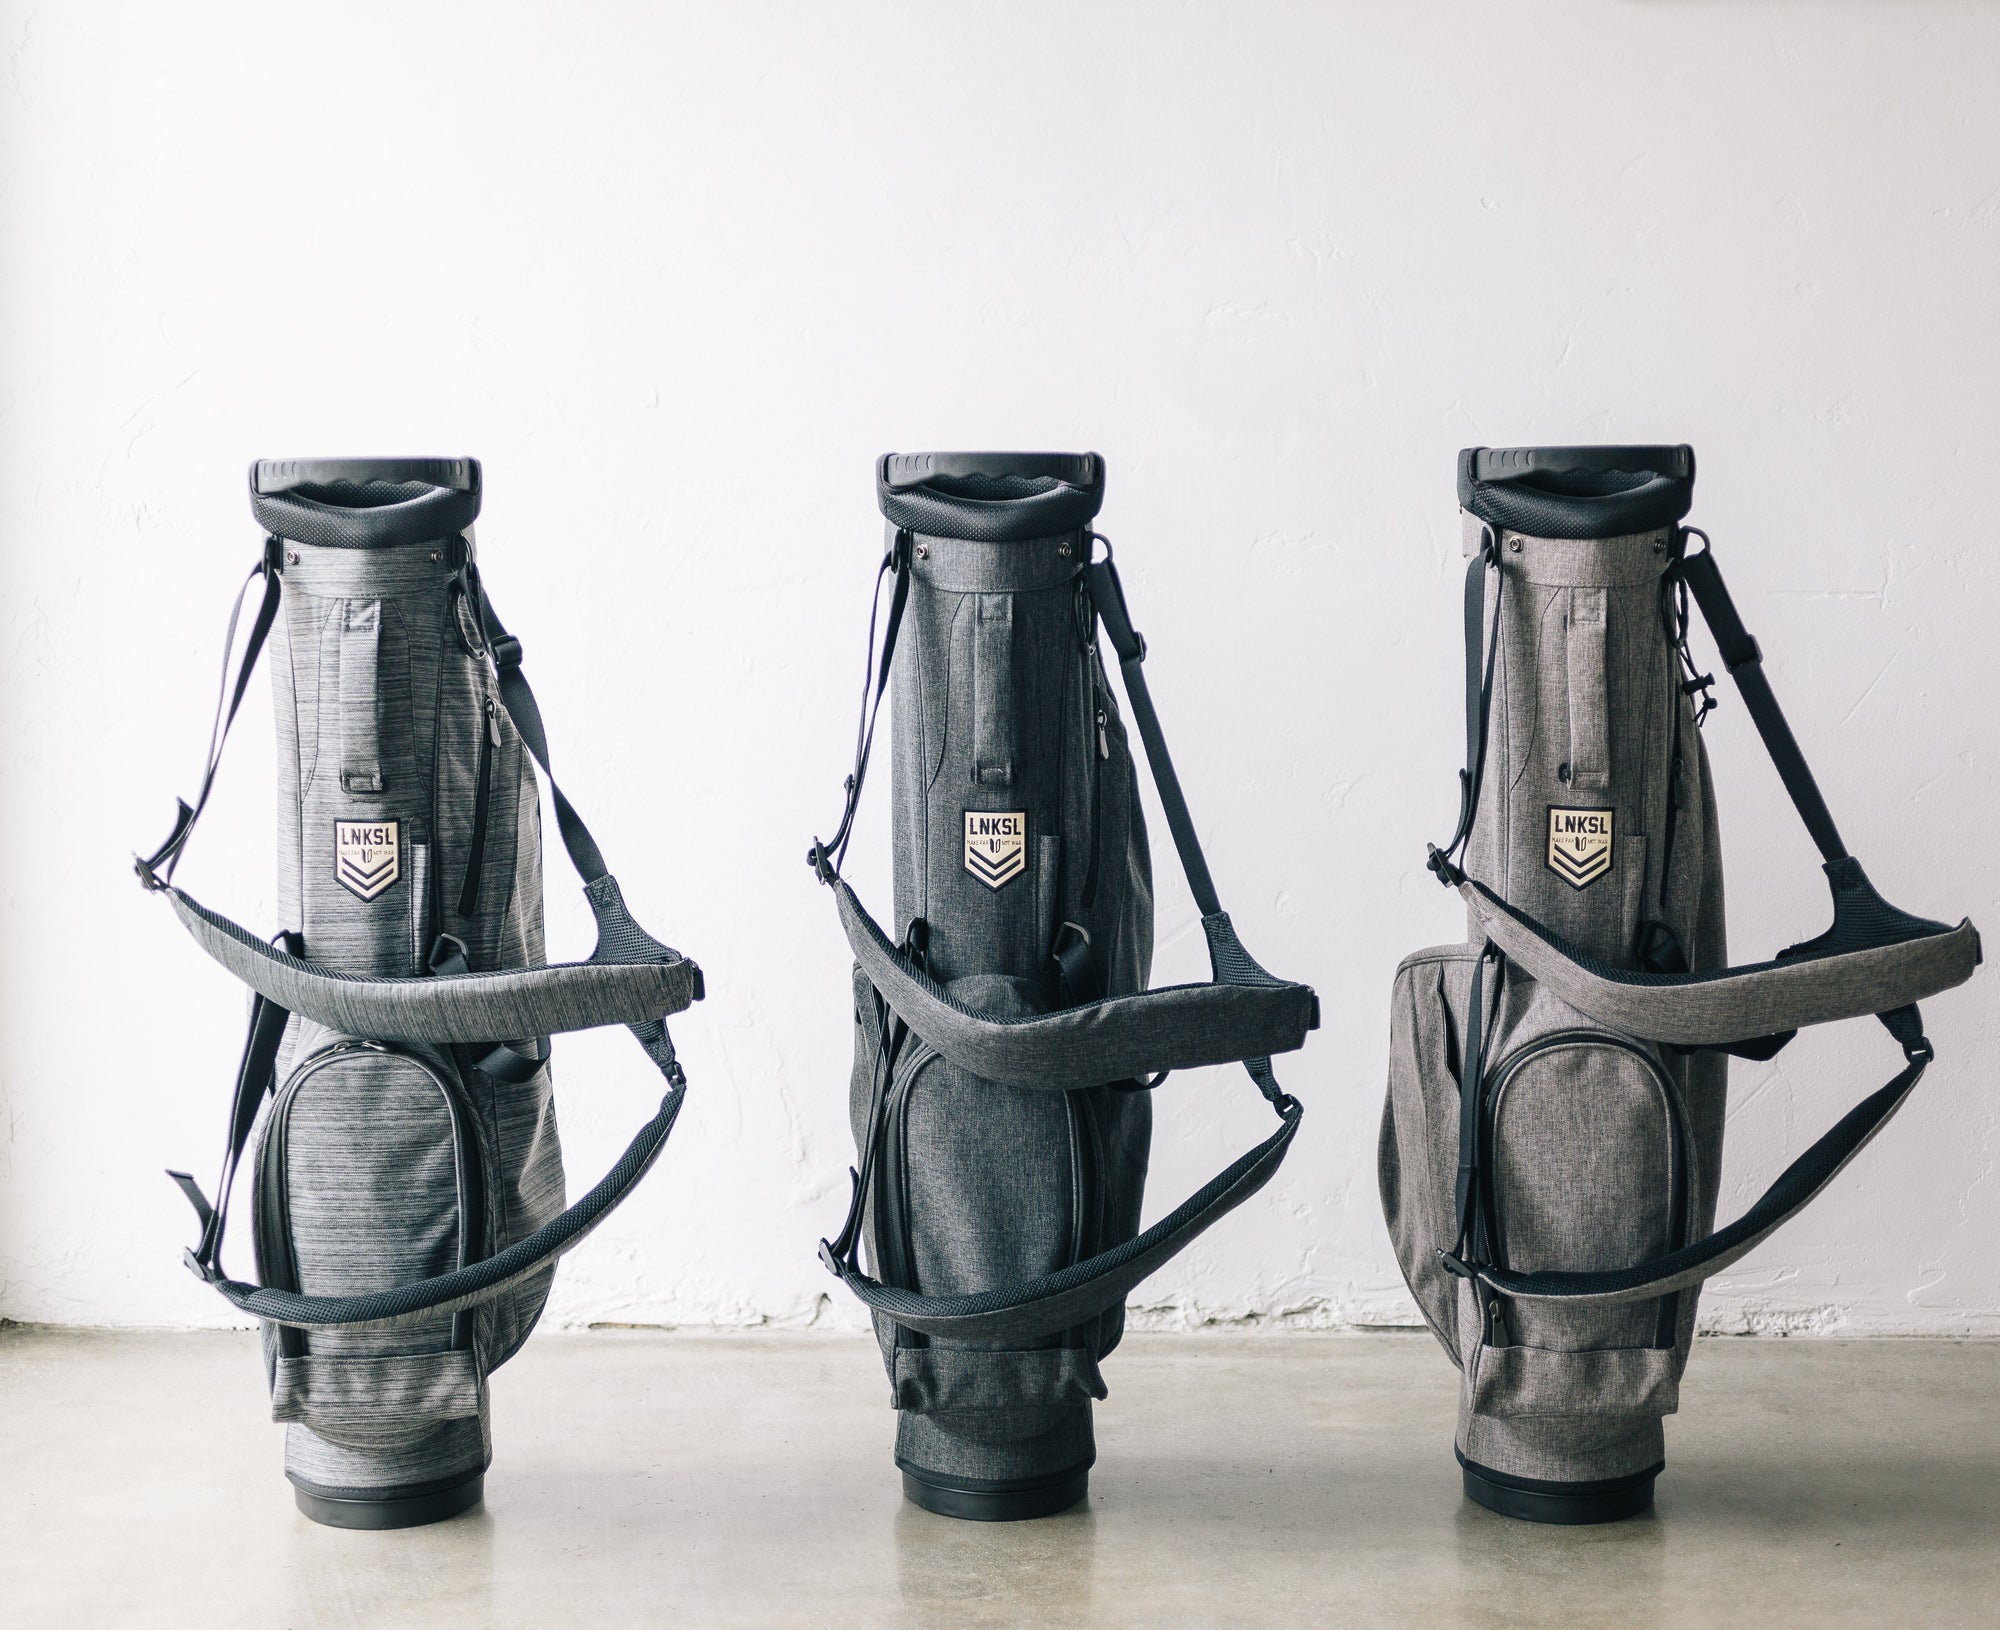 Introducing the Linksouldier Golf Bag